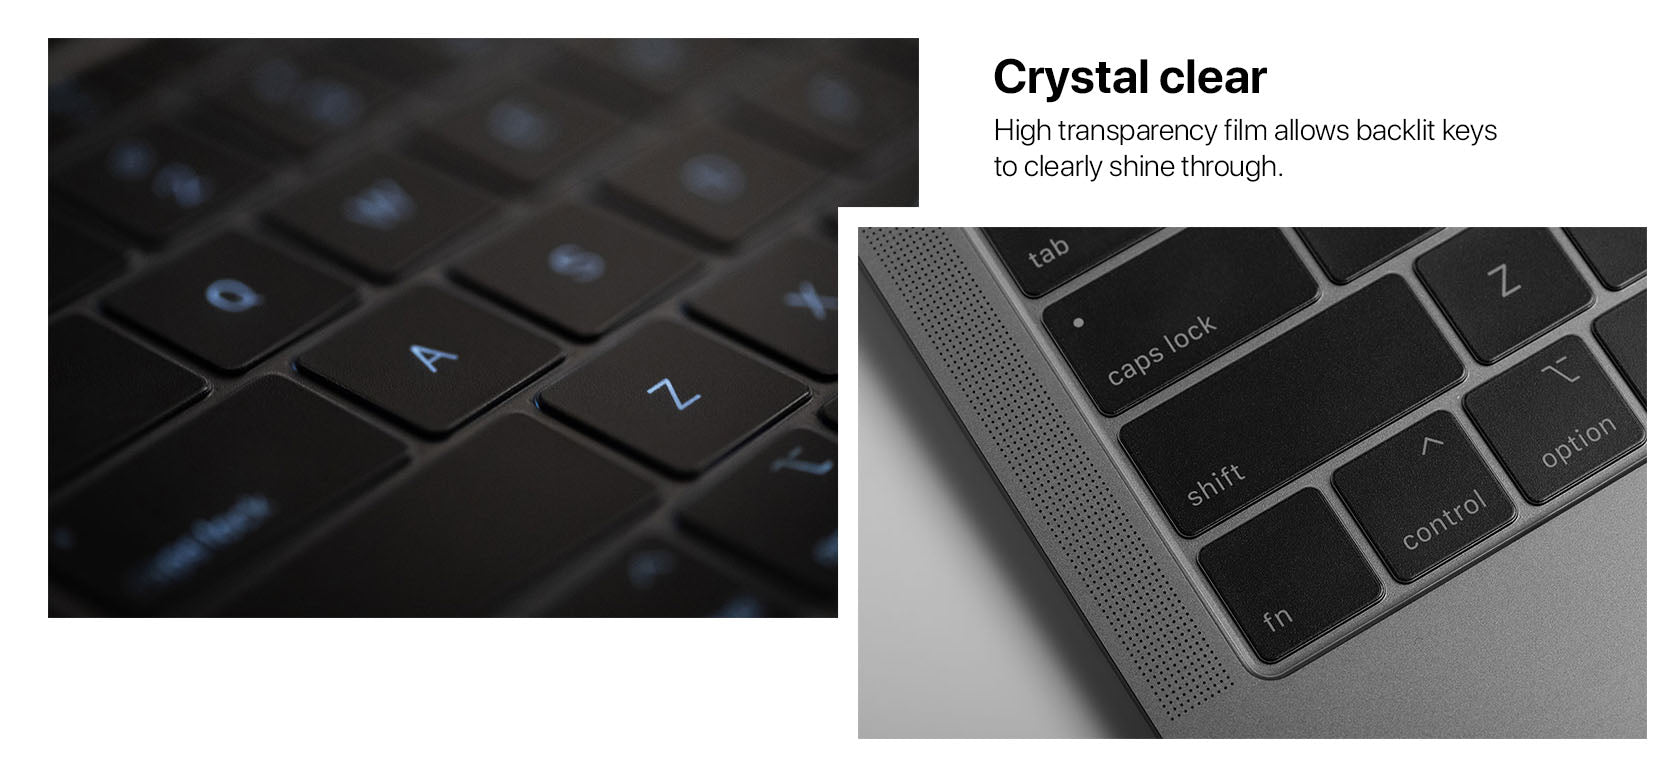 crystal clear High transparency film allows backlit keys to clearly shine through.